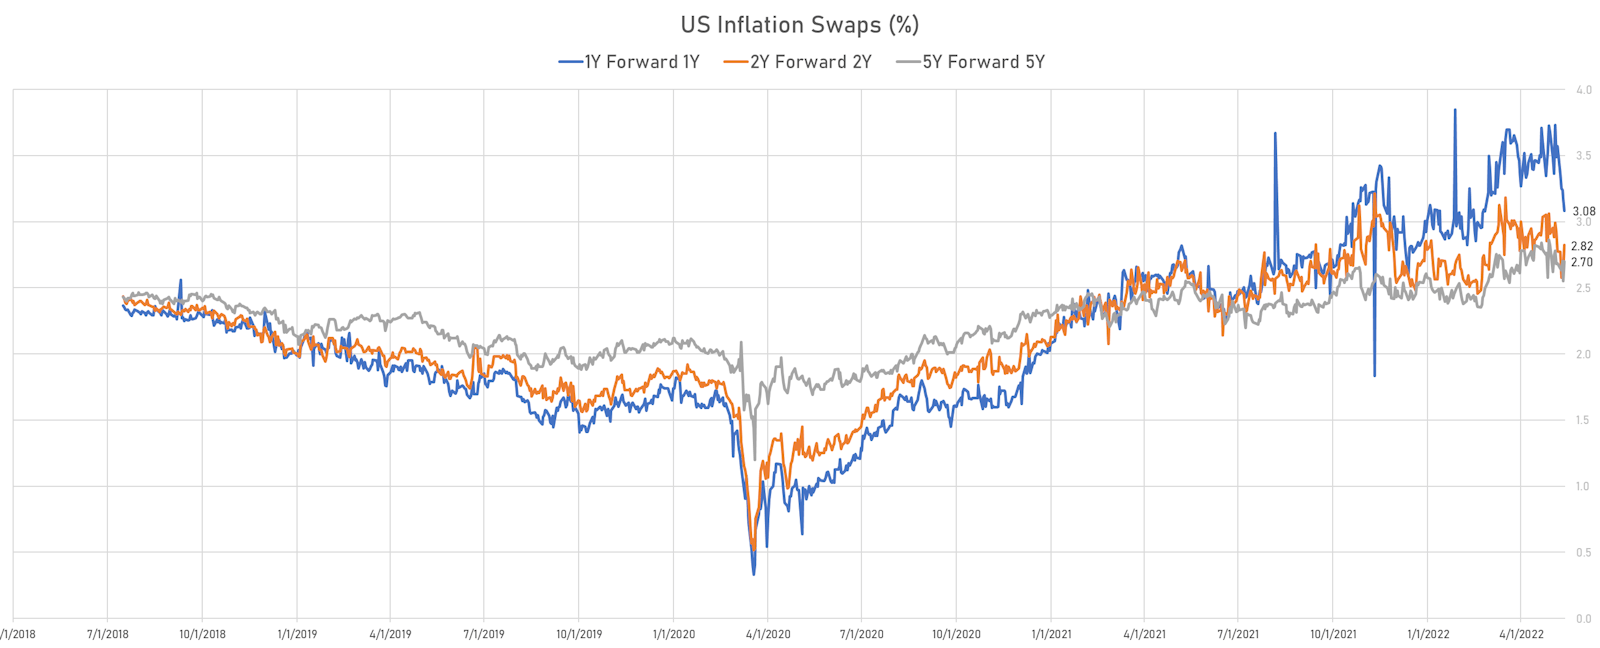 US Forward-Starting Inflation Swaps | Sources: ϕpost, Refinitiv data 